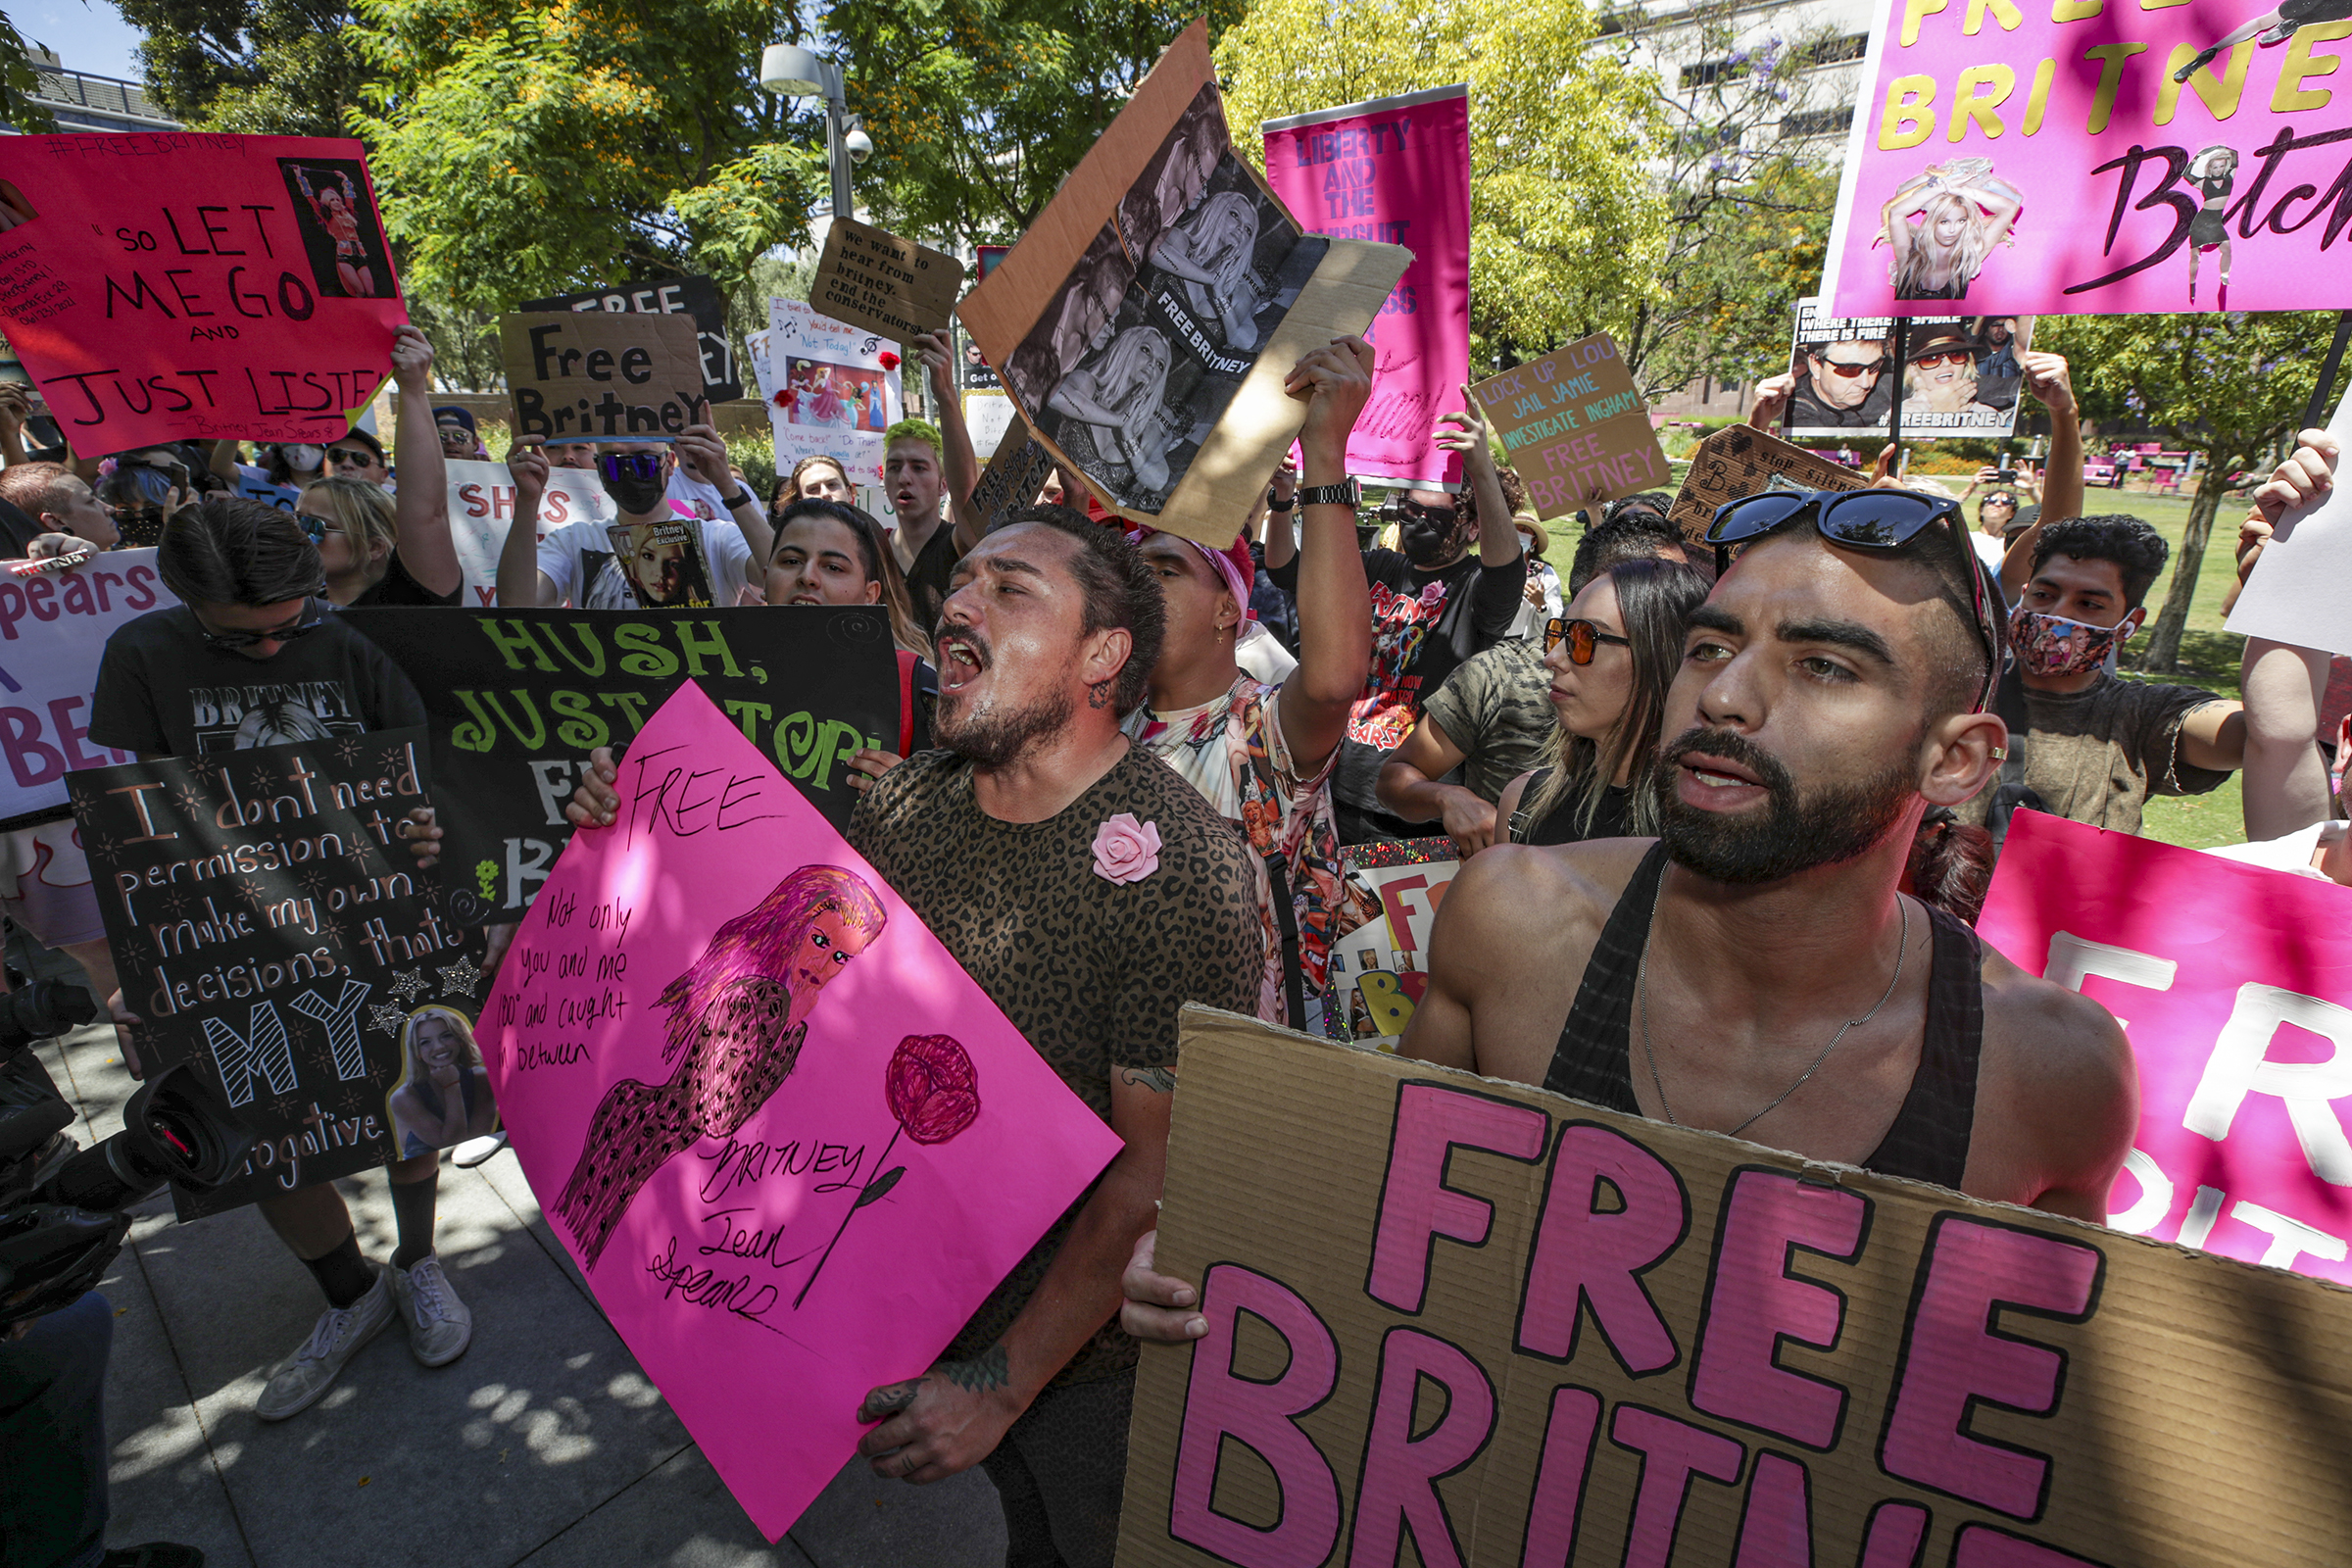 Los Angeles, CA - June 23: Supporters of Britney Spears rally as hearing on the Britney Spears conservatorship case takes place Stanley Mosk Courthouse on Wednesday, June 23, 2021 in Los Angeles, CA. (Irfan Khan / Los Angeles Times via Getty Images)